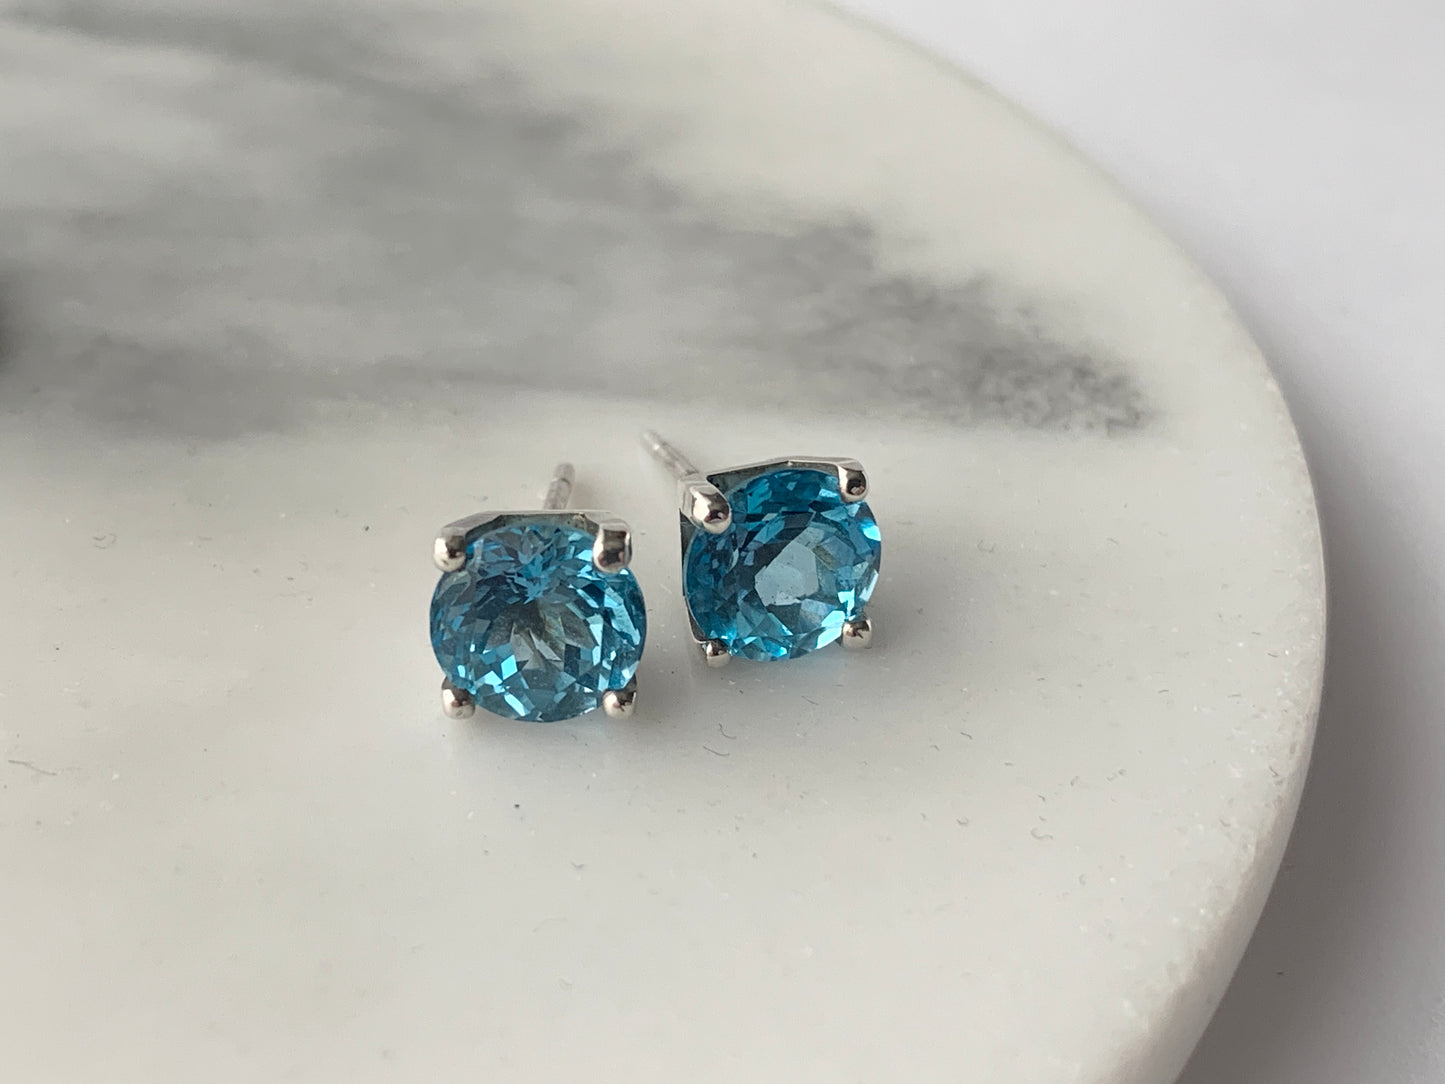 Swiss Blue Topaz stones set in square four claw earrings set in sterling silver